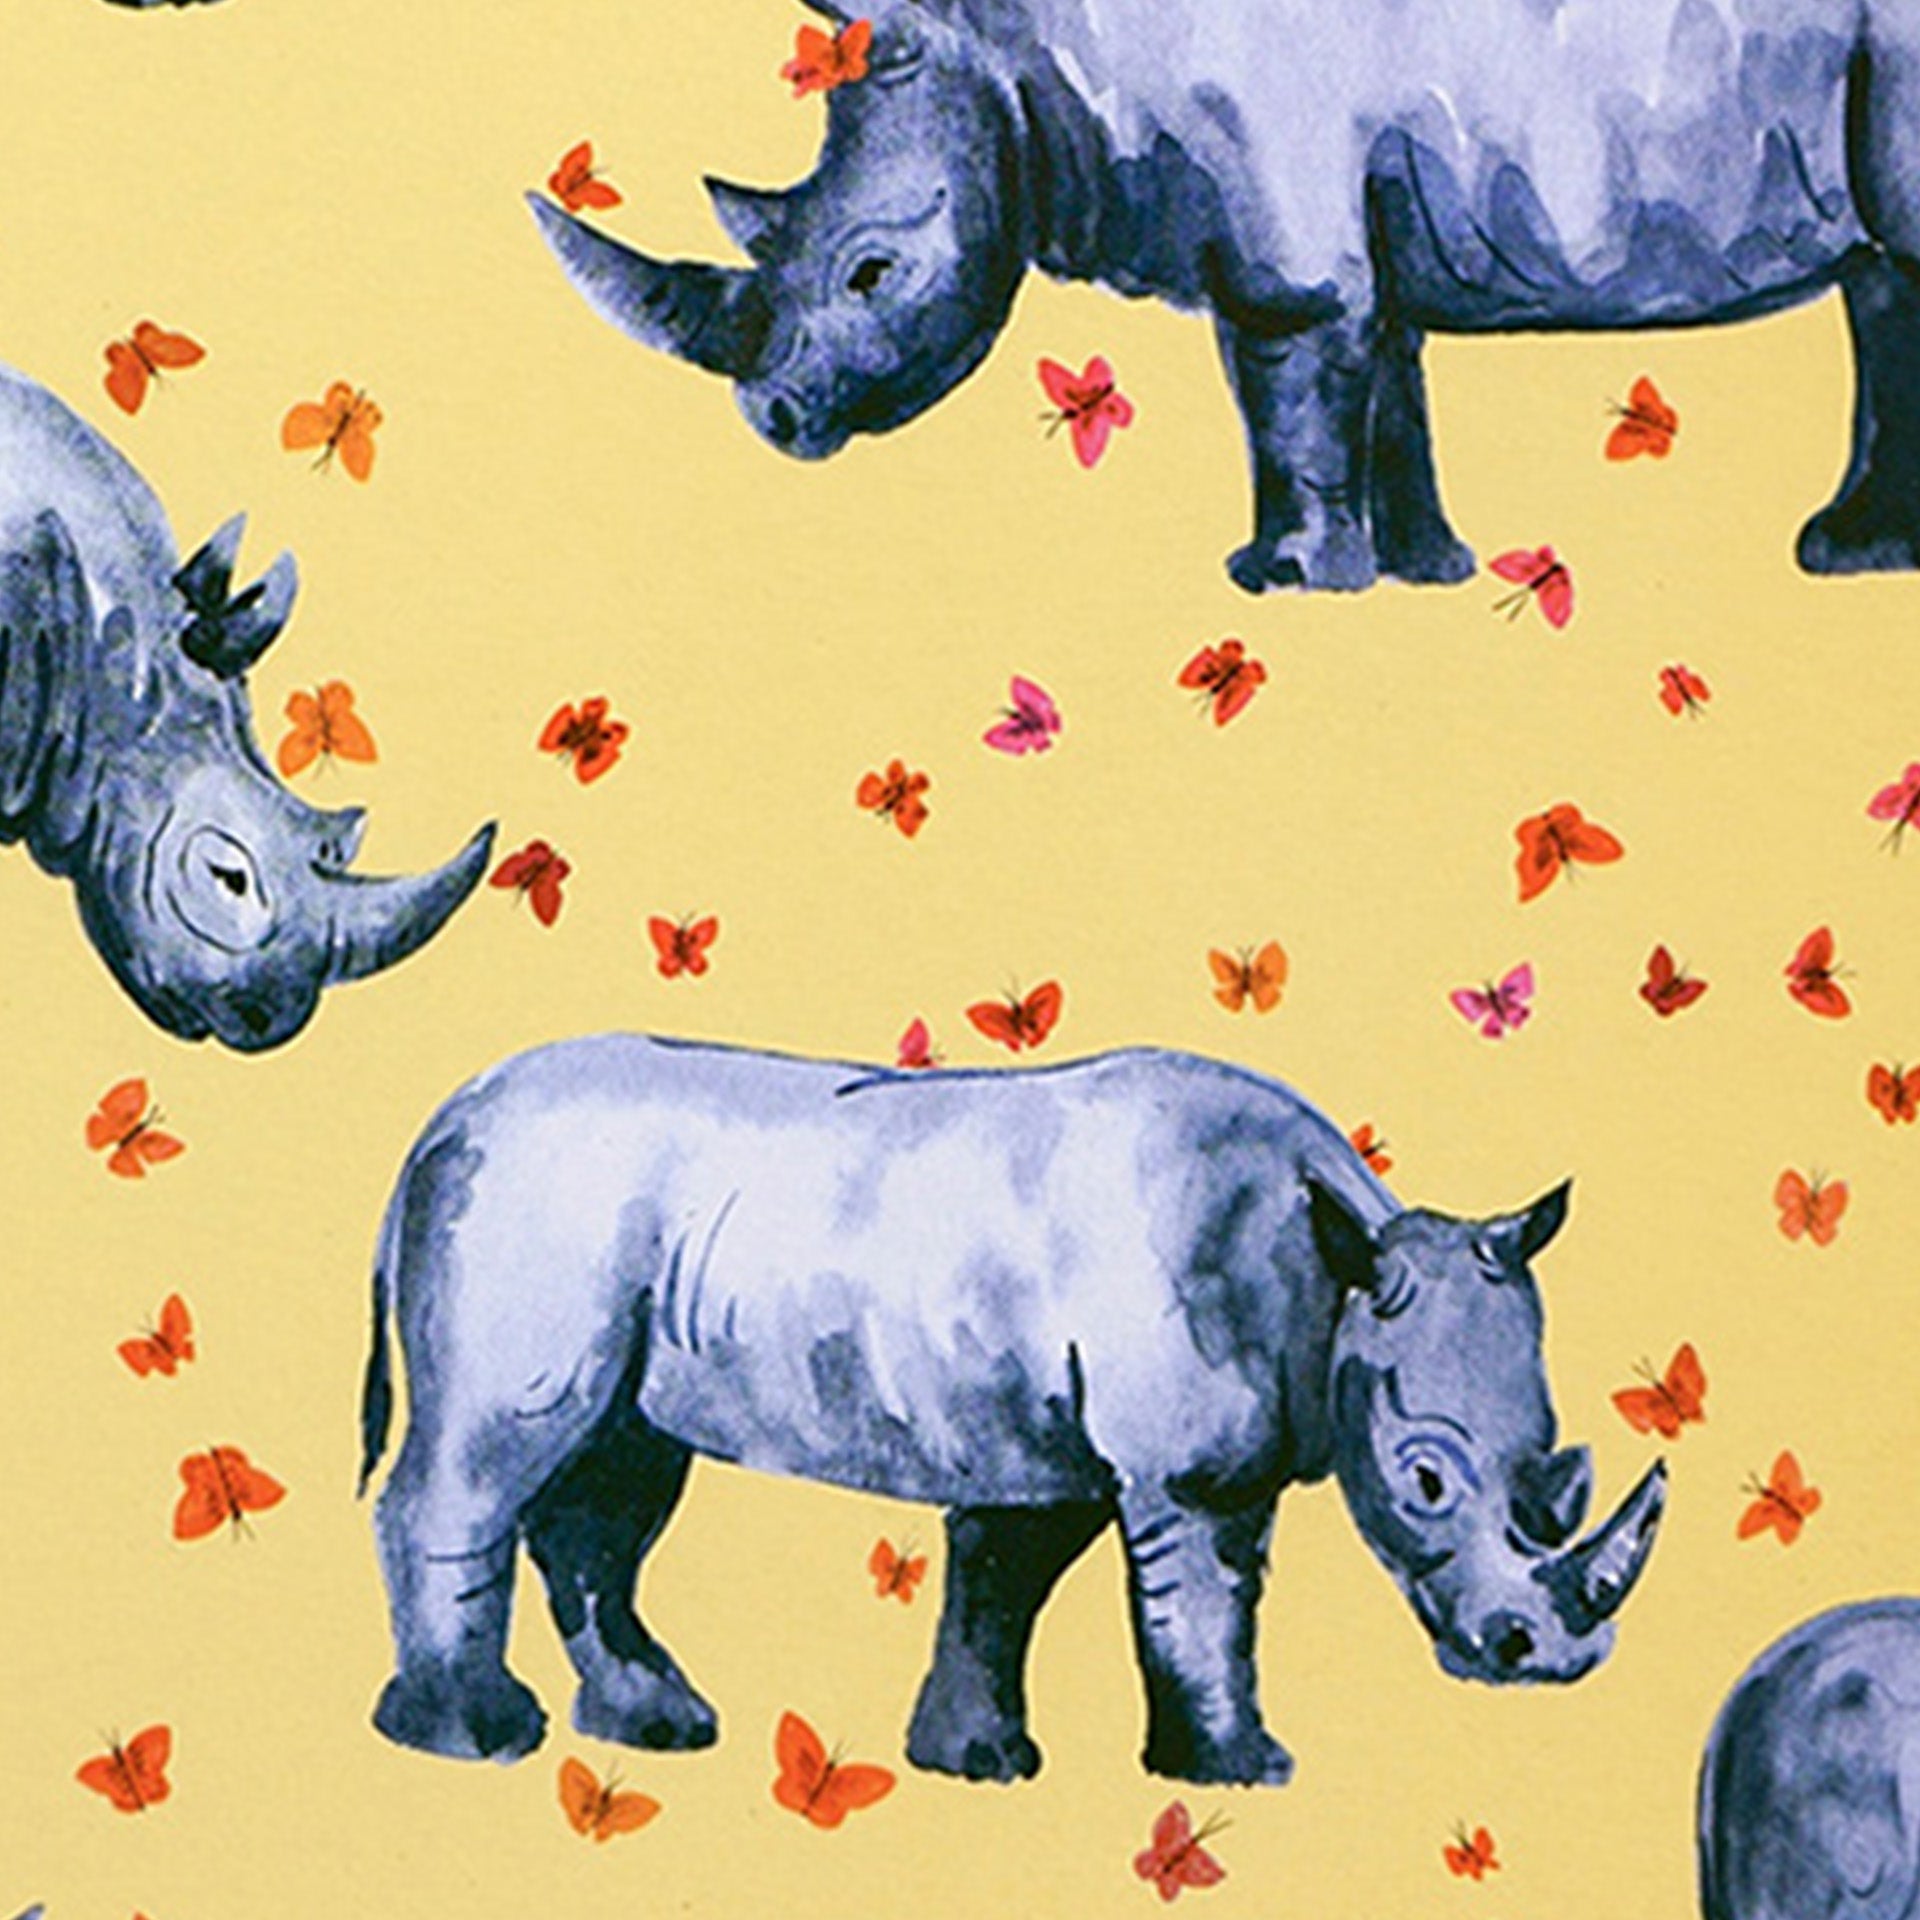 Closeup of rhinoceroses and butterflies printed on yellow